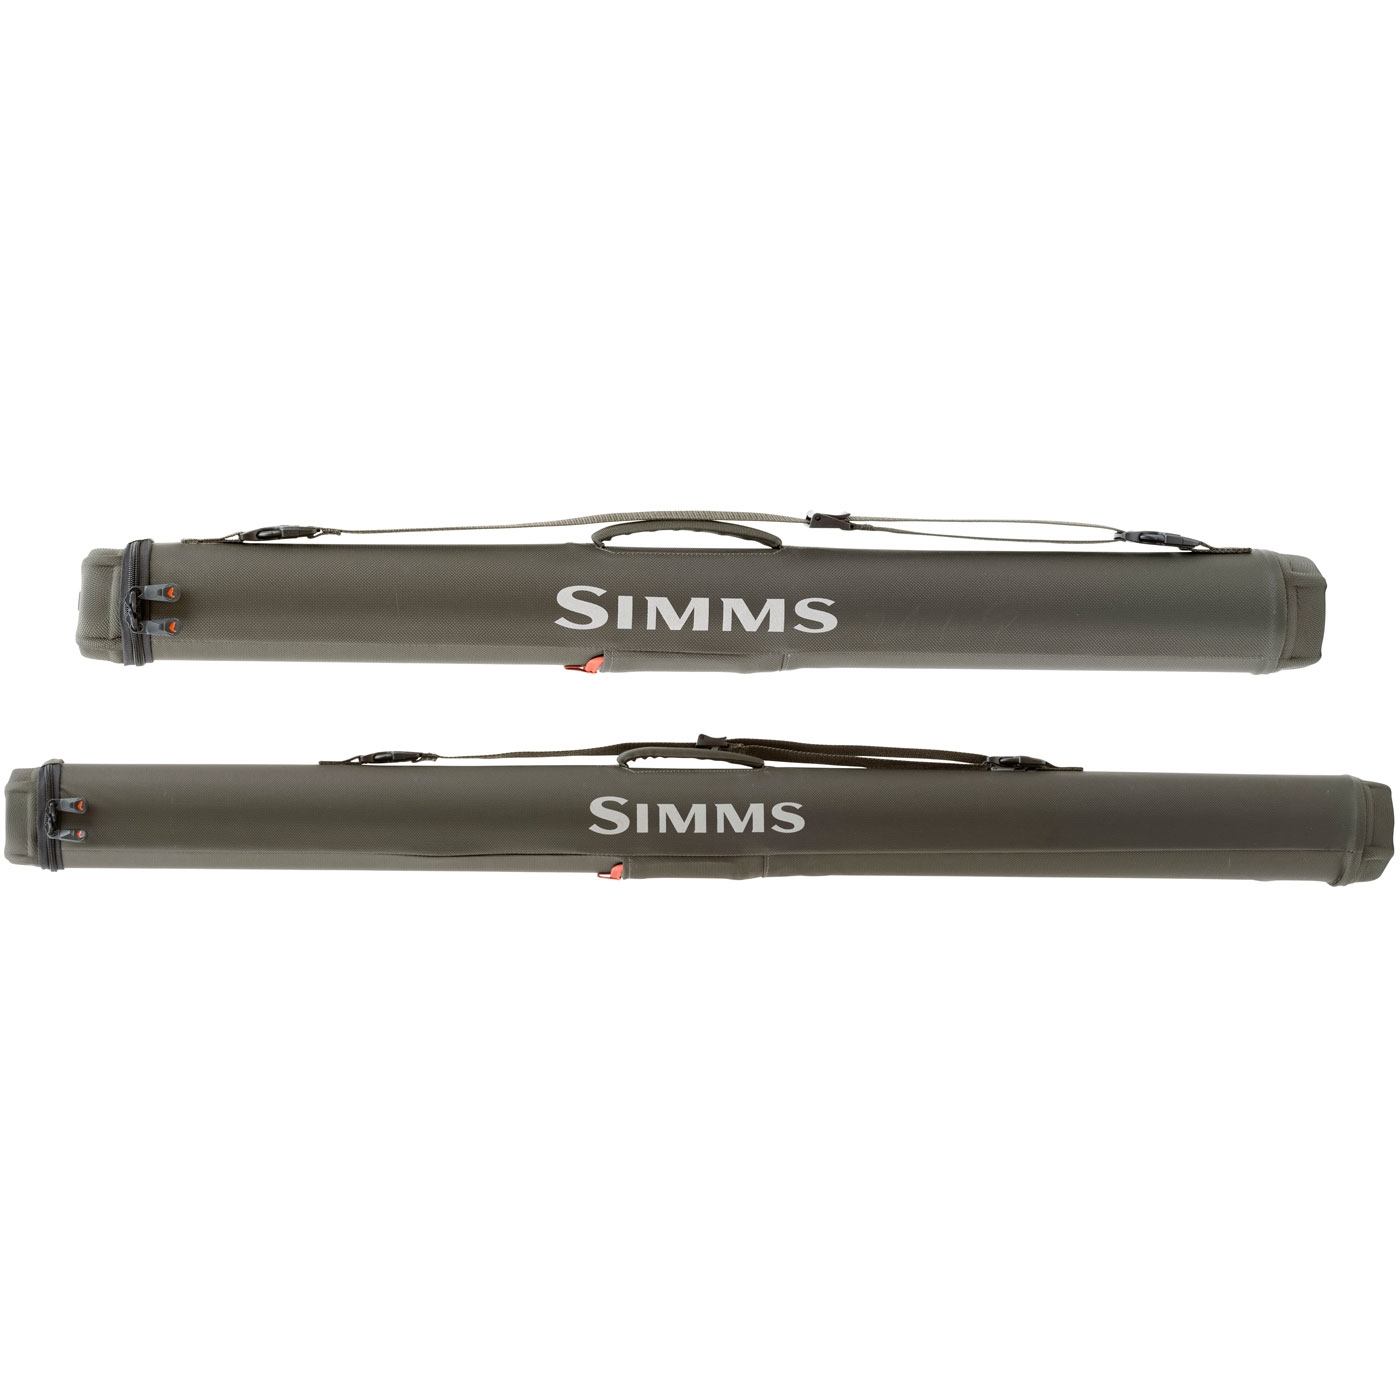 Simms Bounty Hunter 3 Rod Cannon Tubes - Fishing Cases Bags Storage